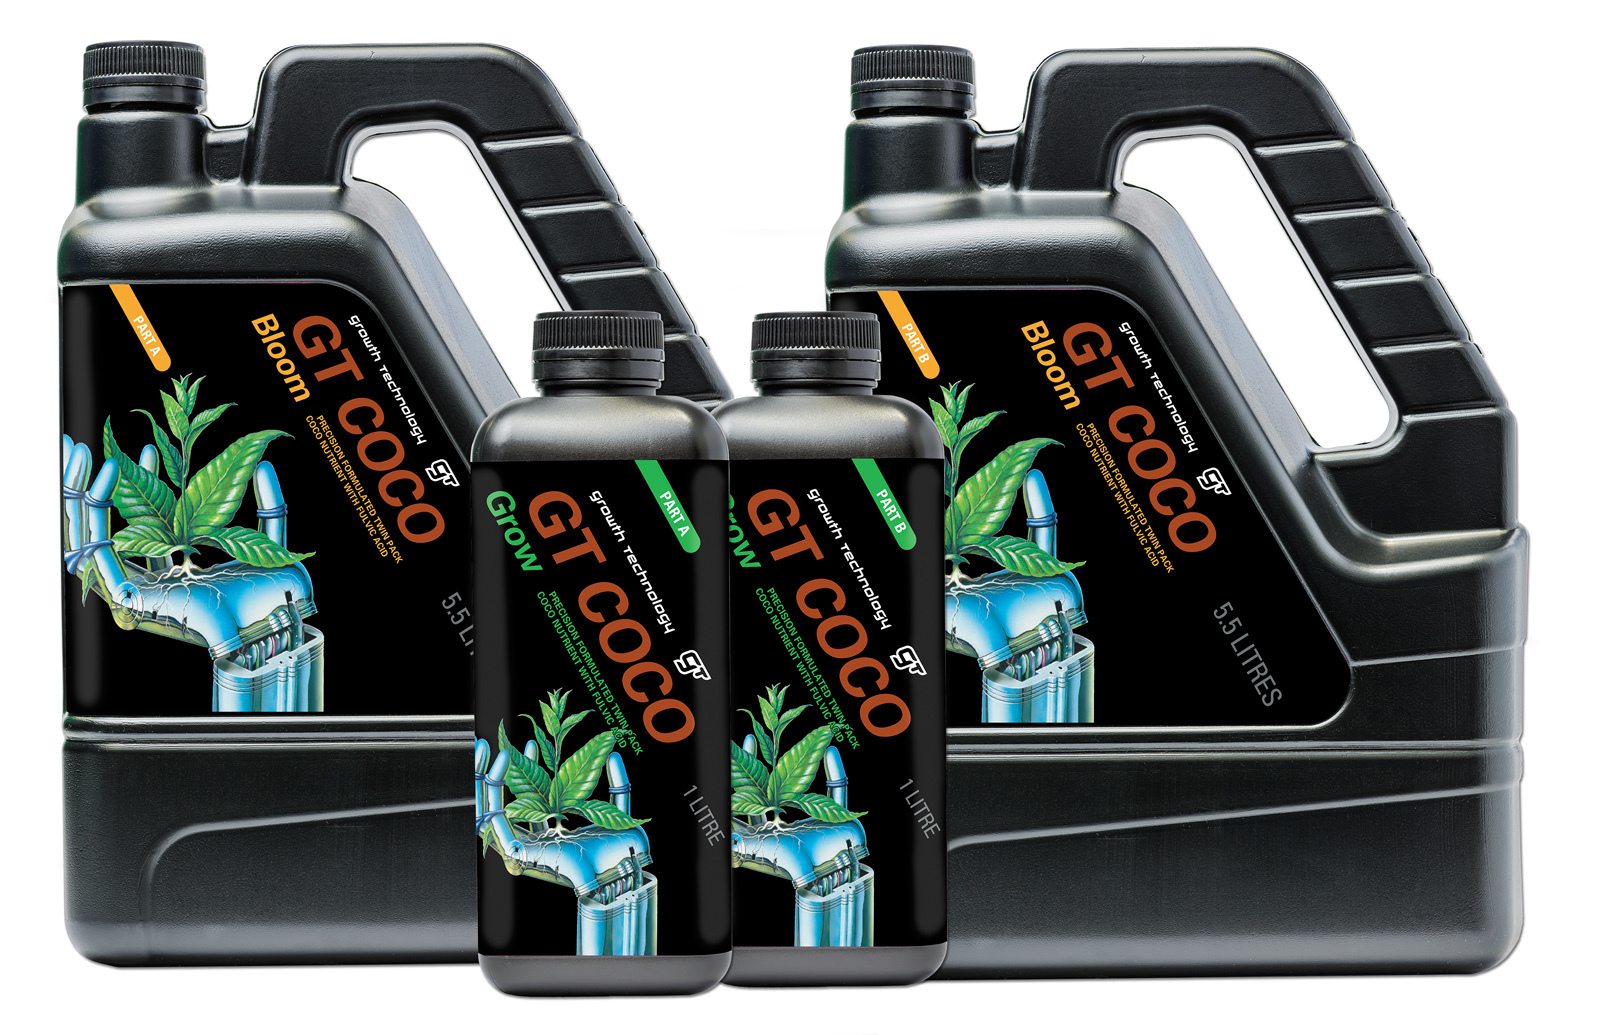 GT Coco Grow 20+20Ltr = 40L set - Growth technology makers of Optimum Grow